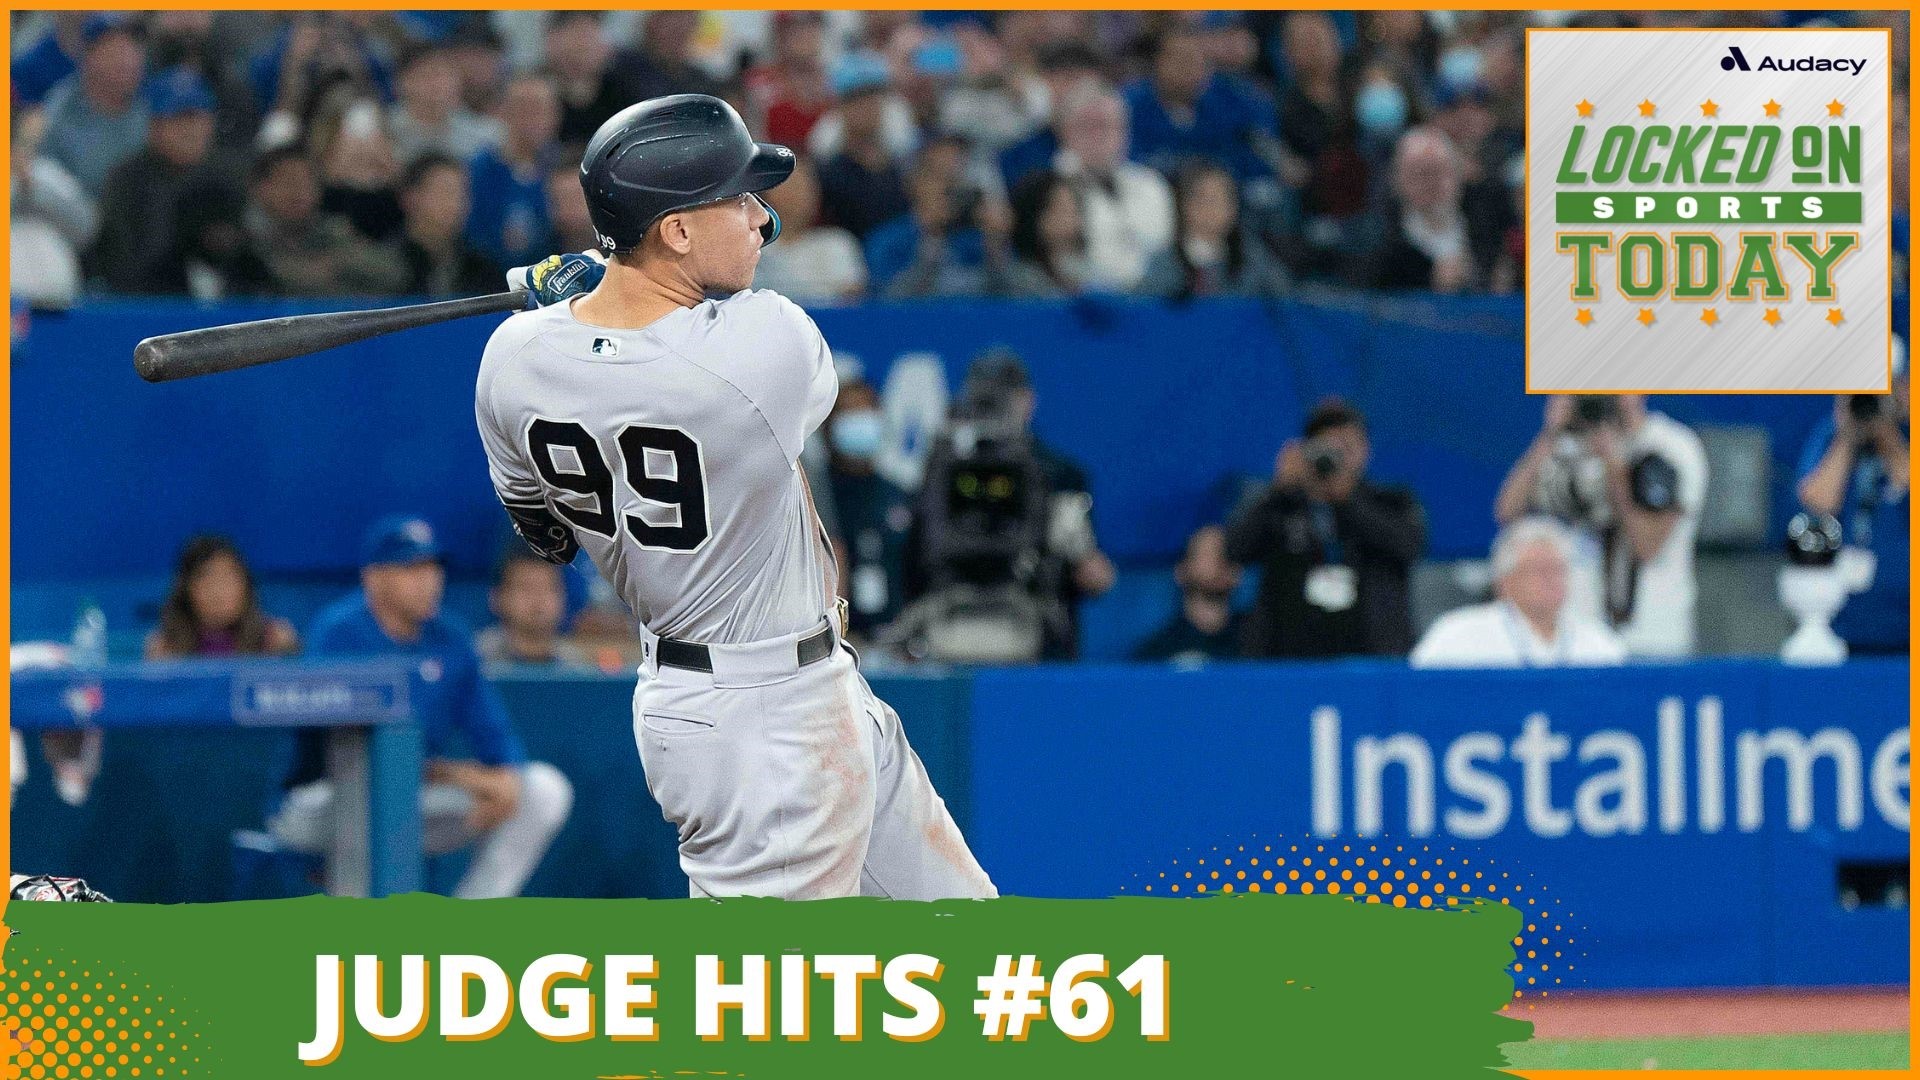 Discussing and debating the day's top sports stories from Aaron Judge hitting his 61st homerun of the season to what Zach Wilson's return means for the Giants.